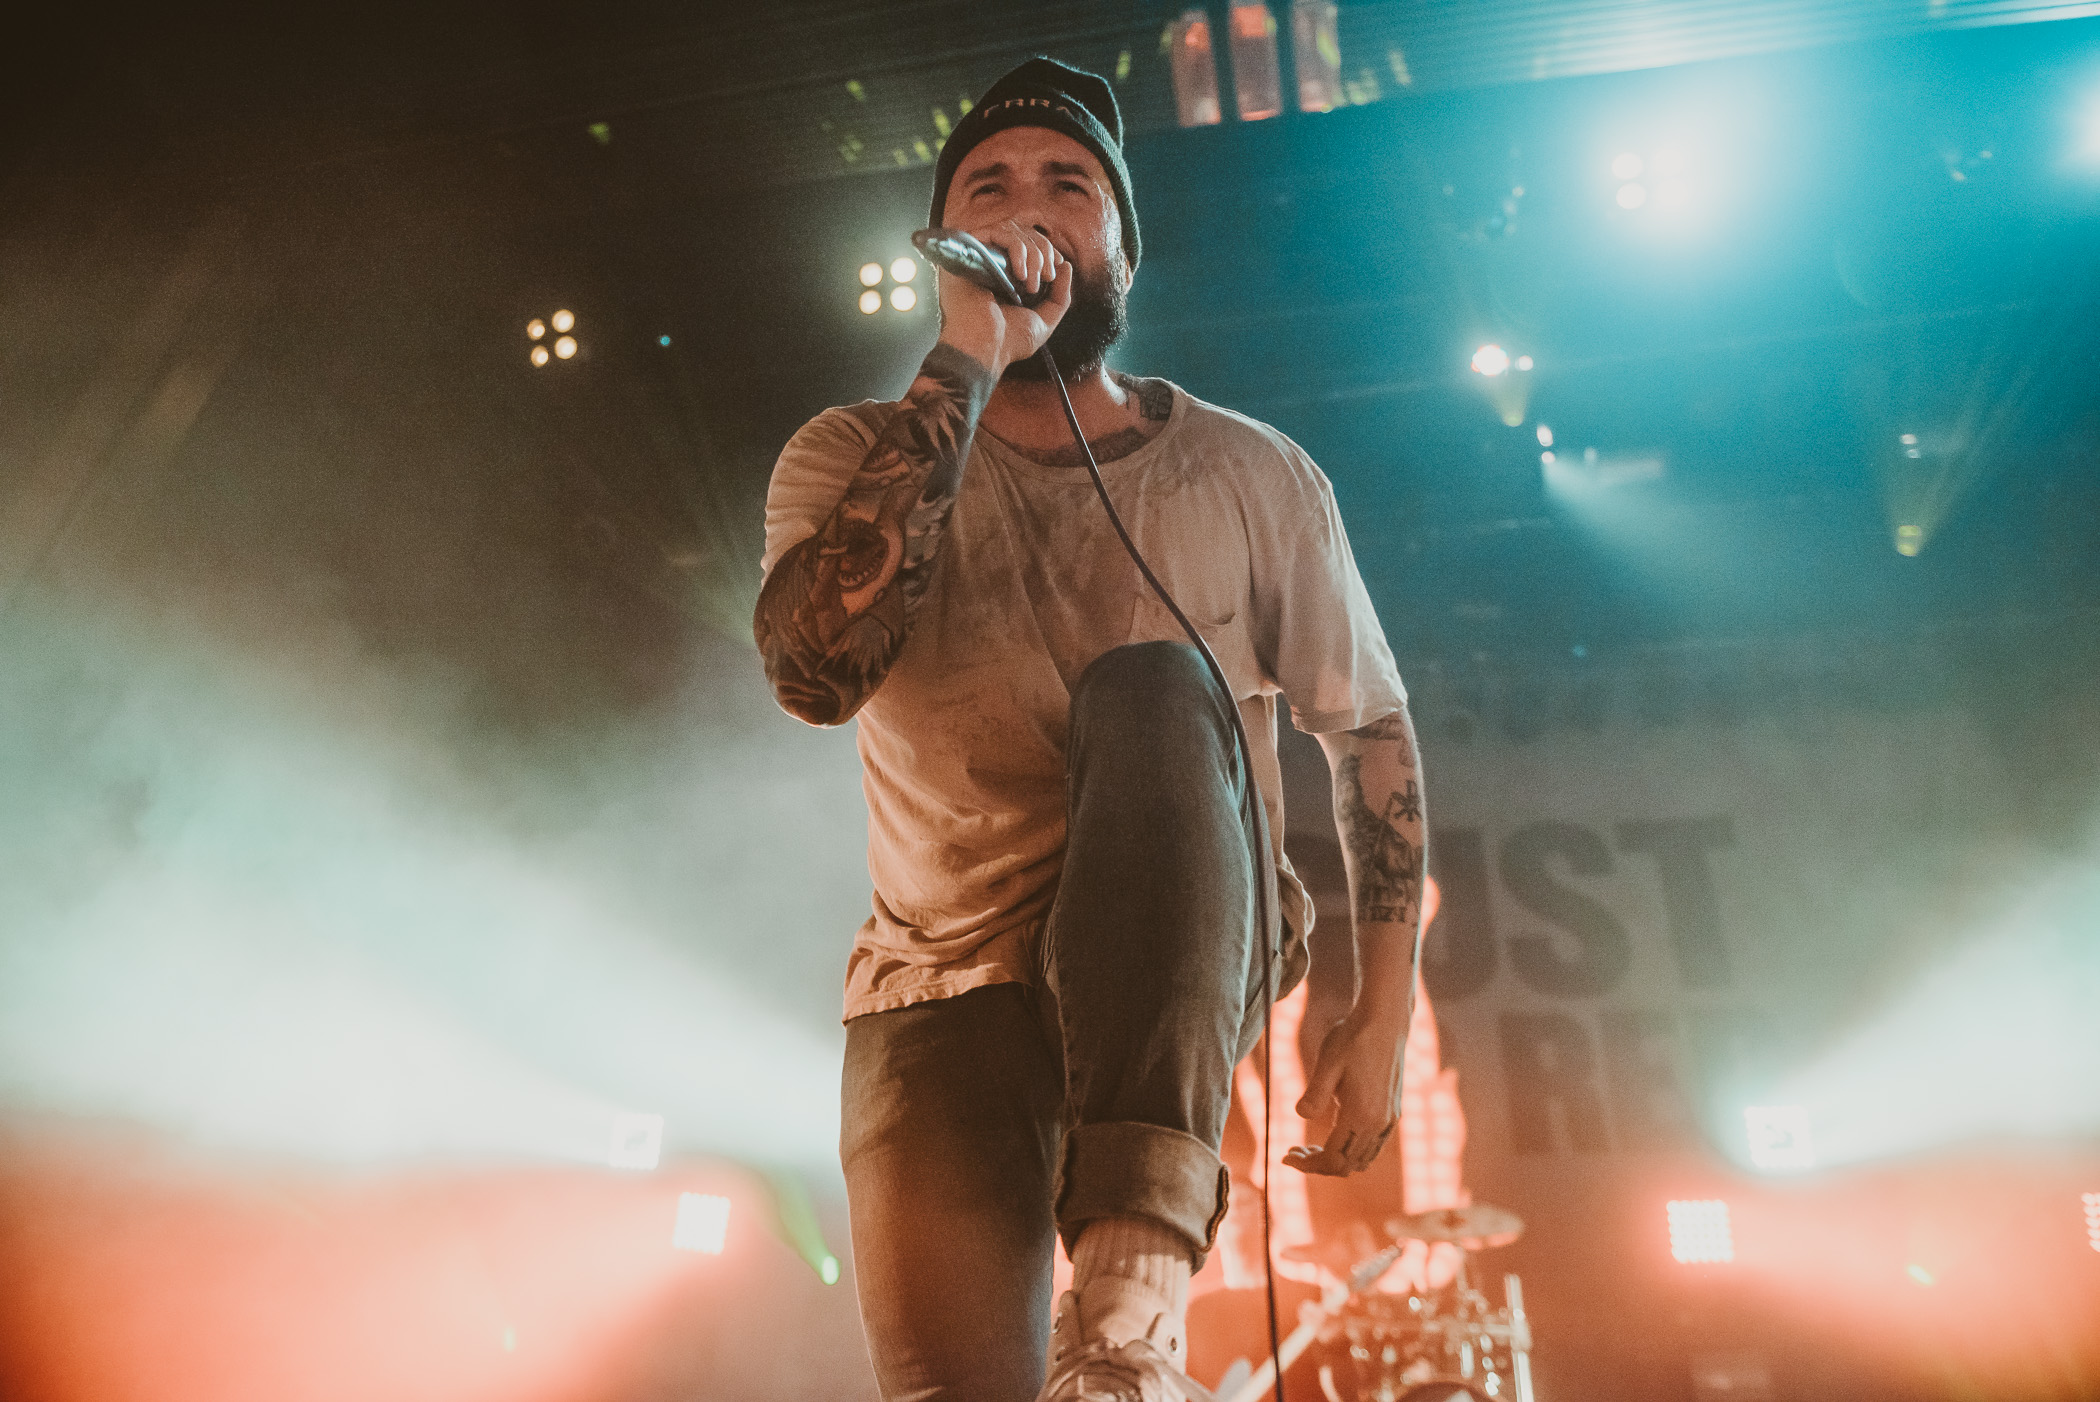 1_August_Burns_Red-Vogue_Theatre-Timothy_Nguyen-20180119 (14 of 15).jpg